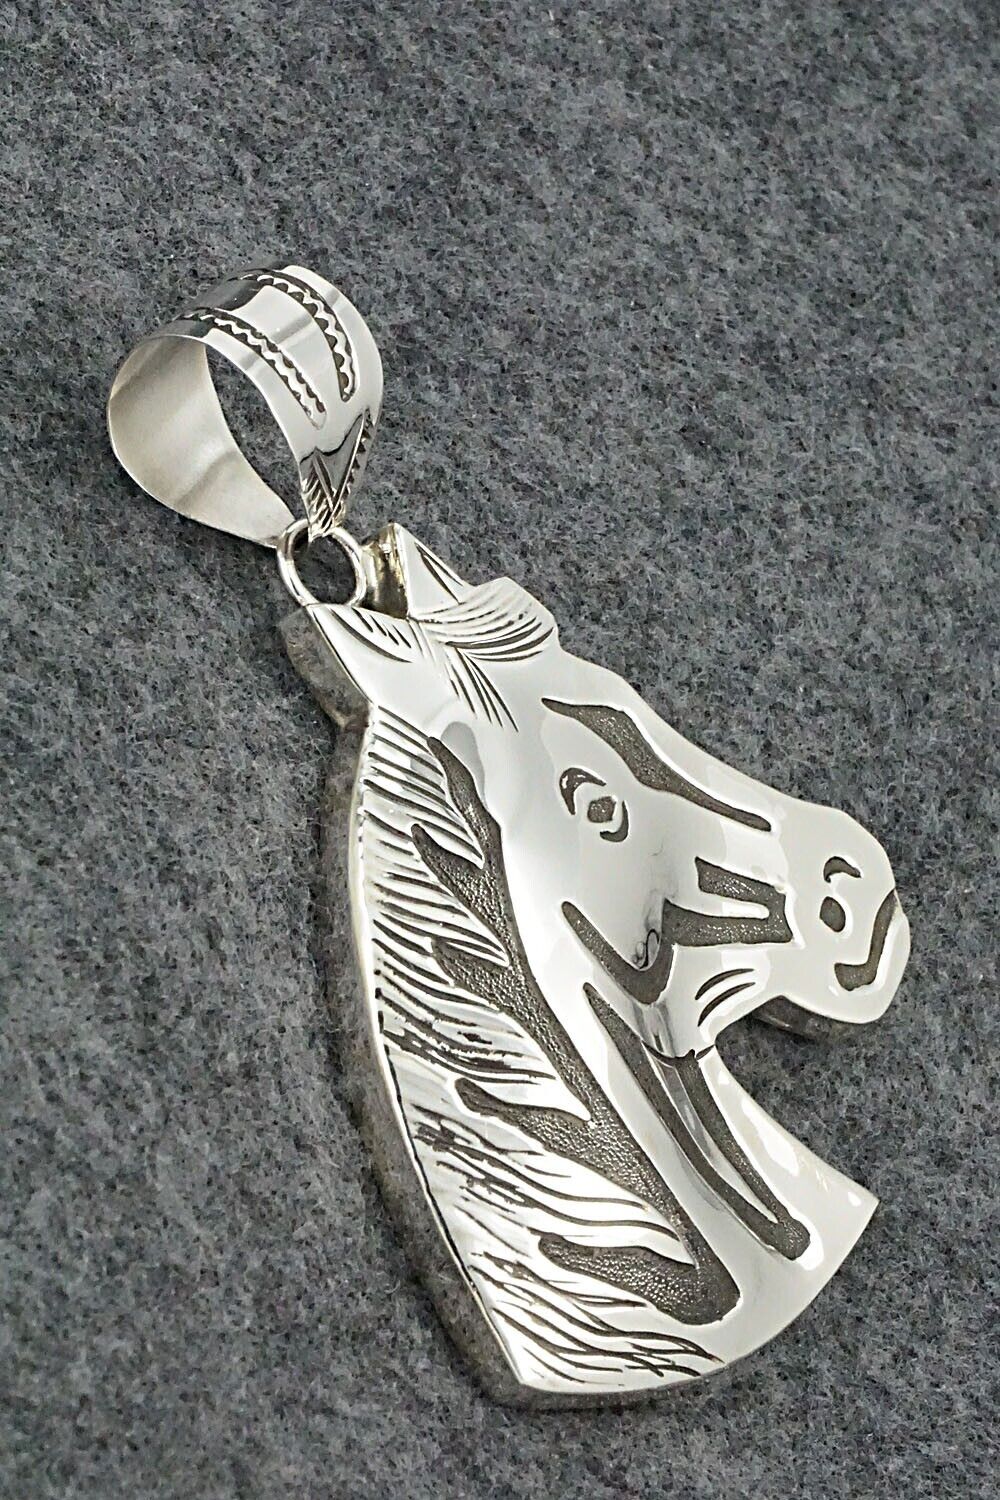 Sterling Silver Pendant - A. Mariano